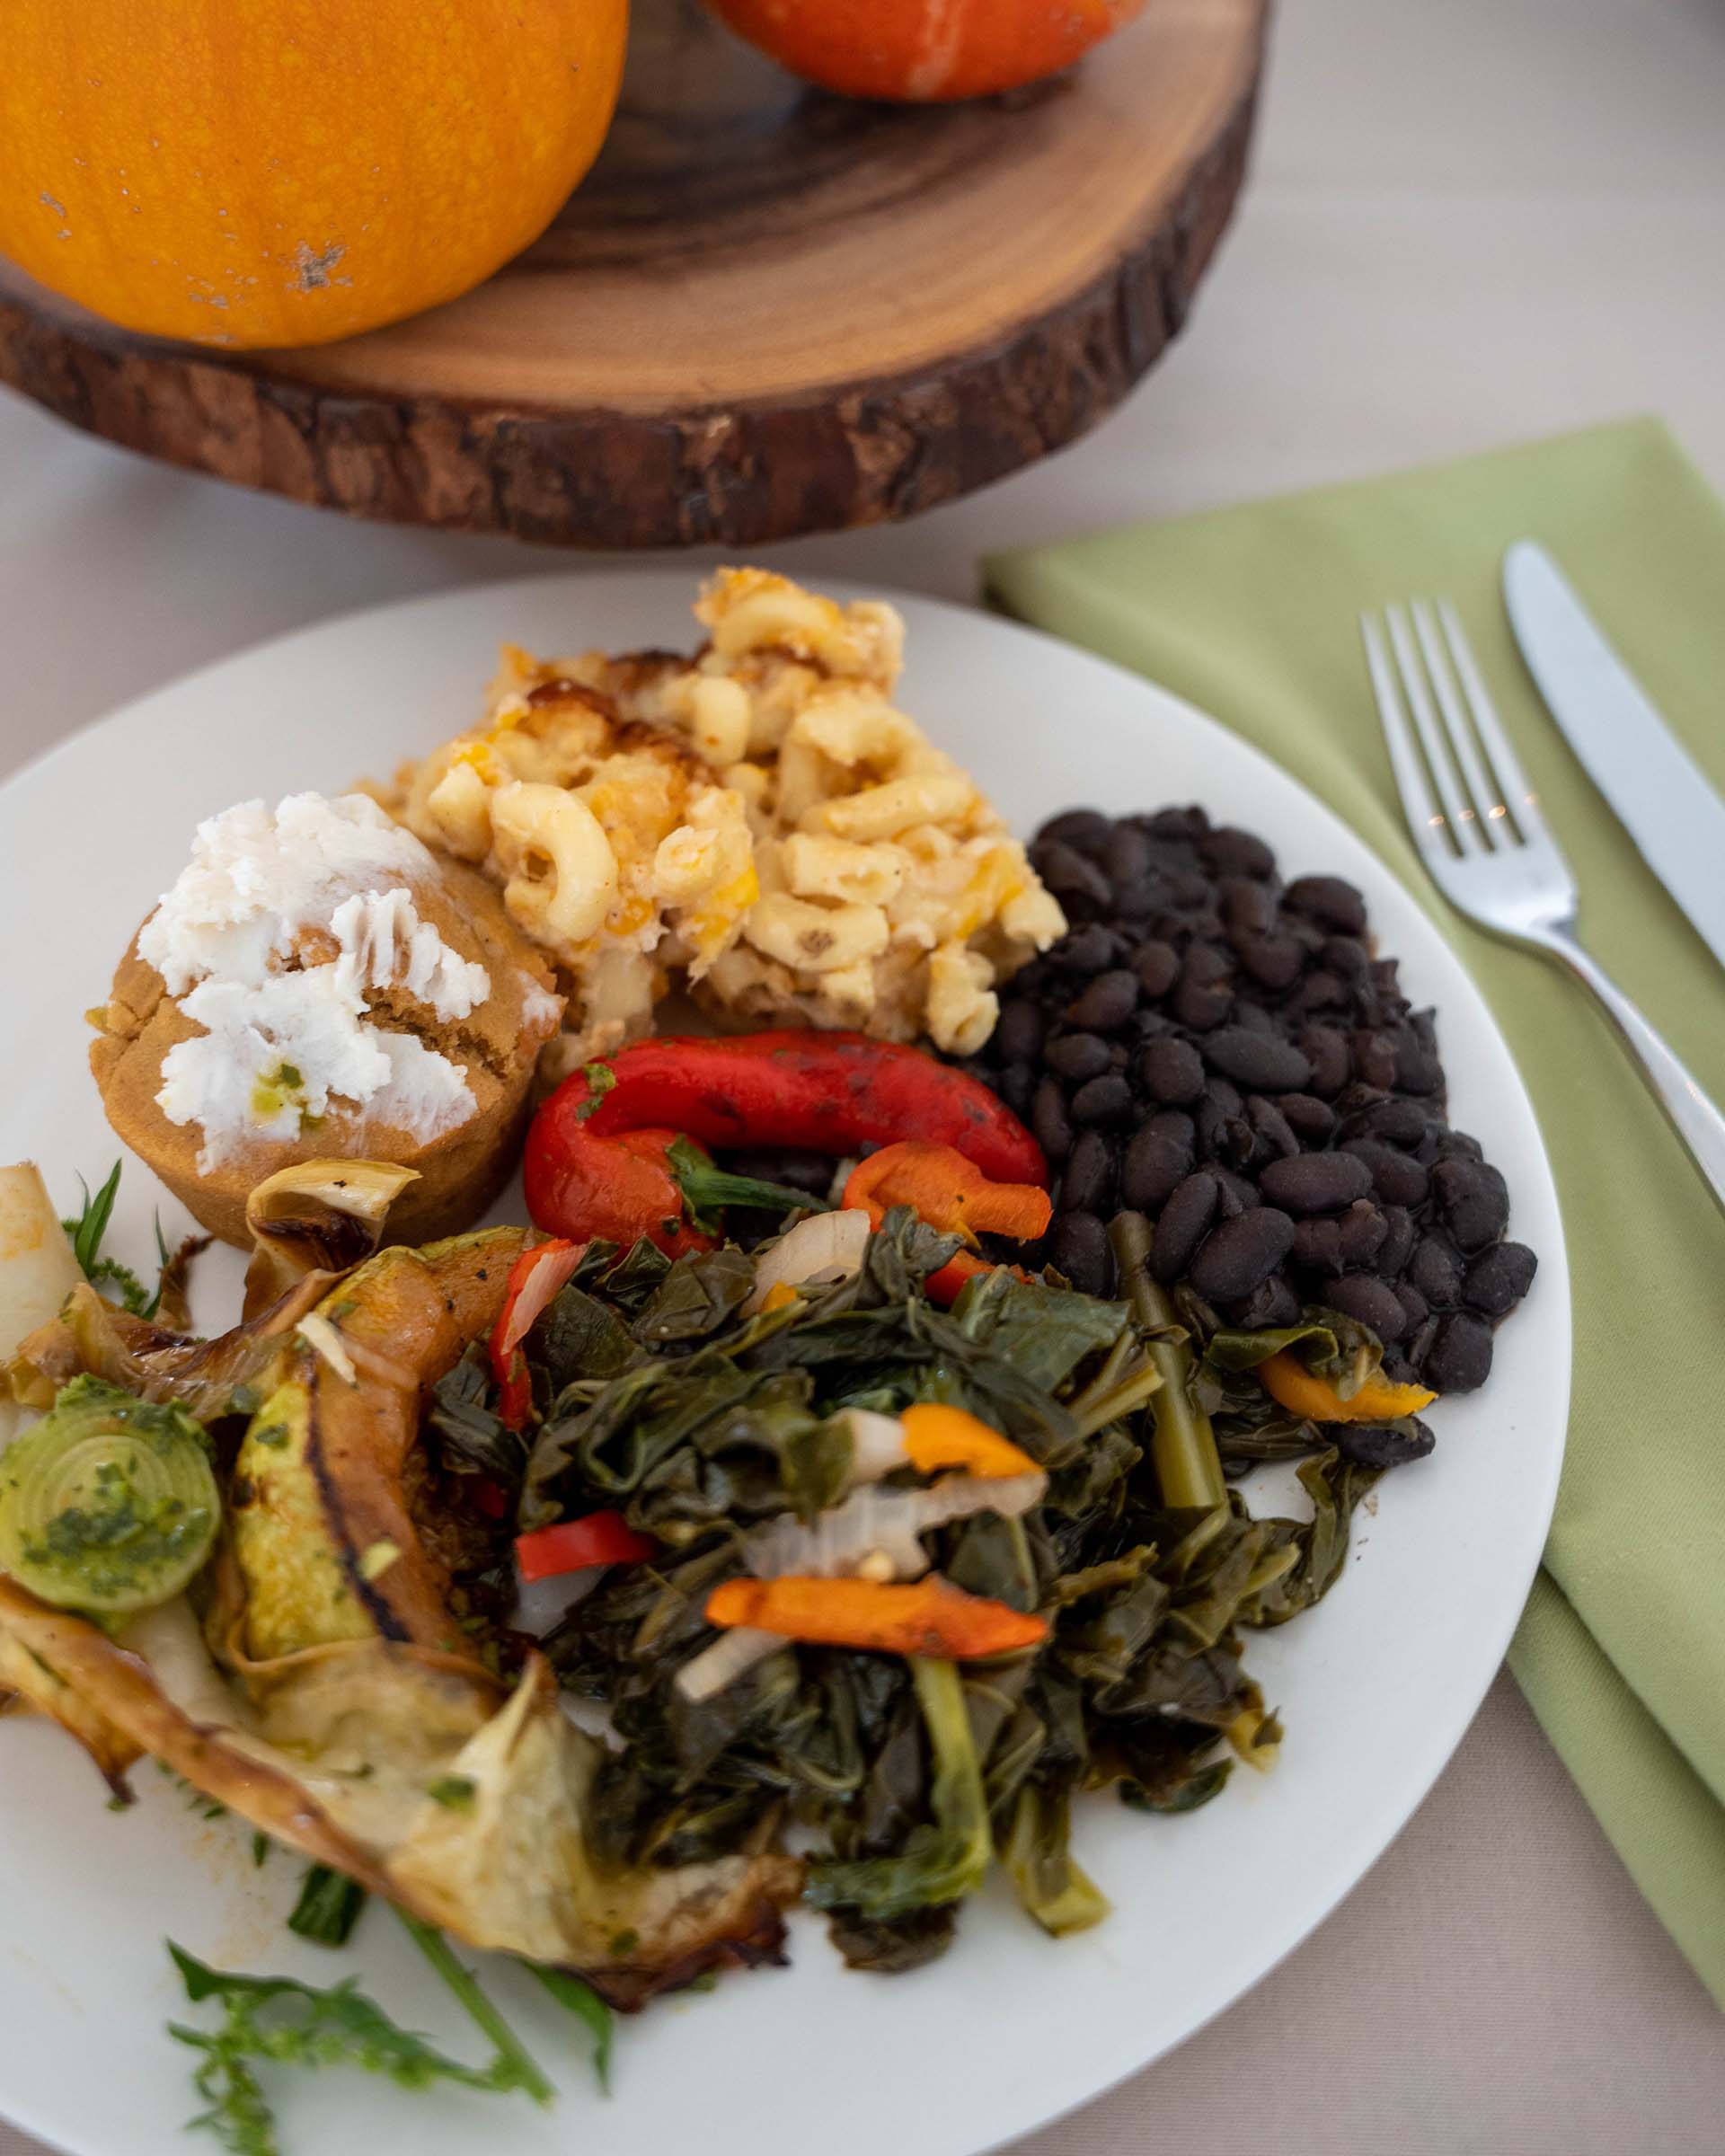 An abundant plate of food, including greens, beans and mac and cheese.